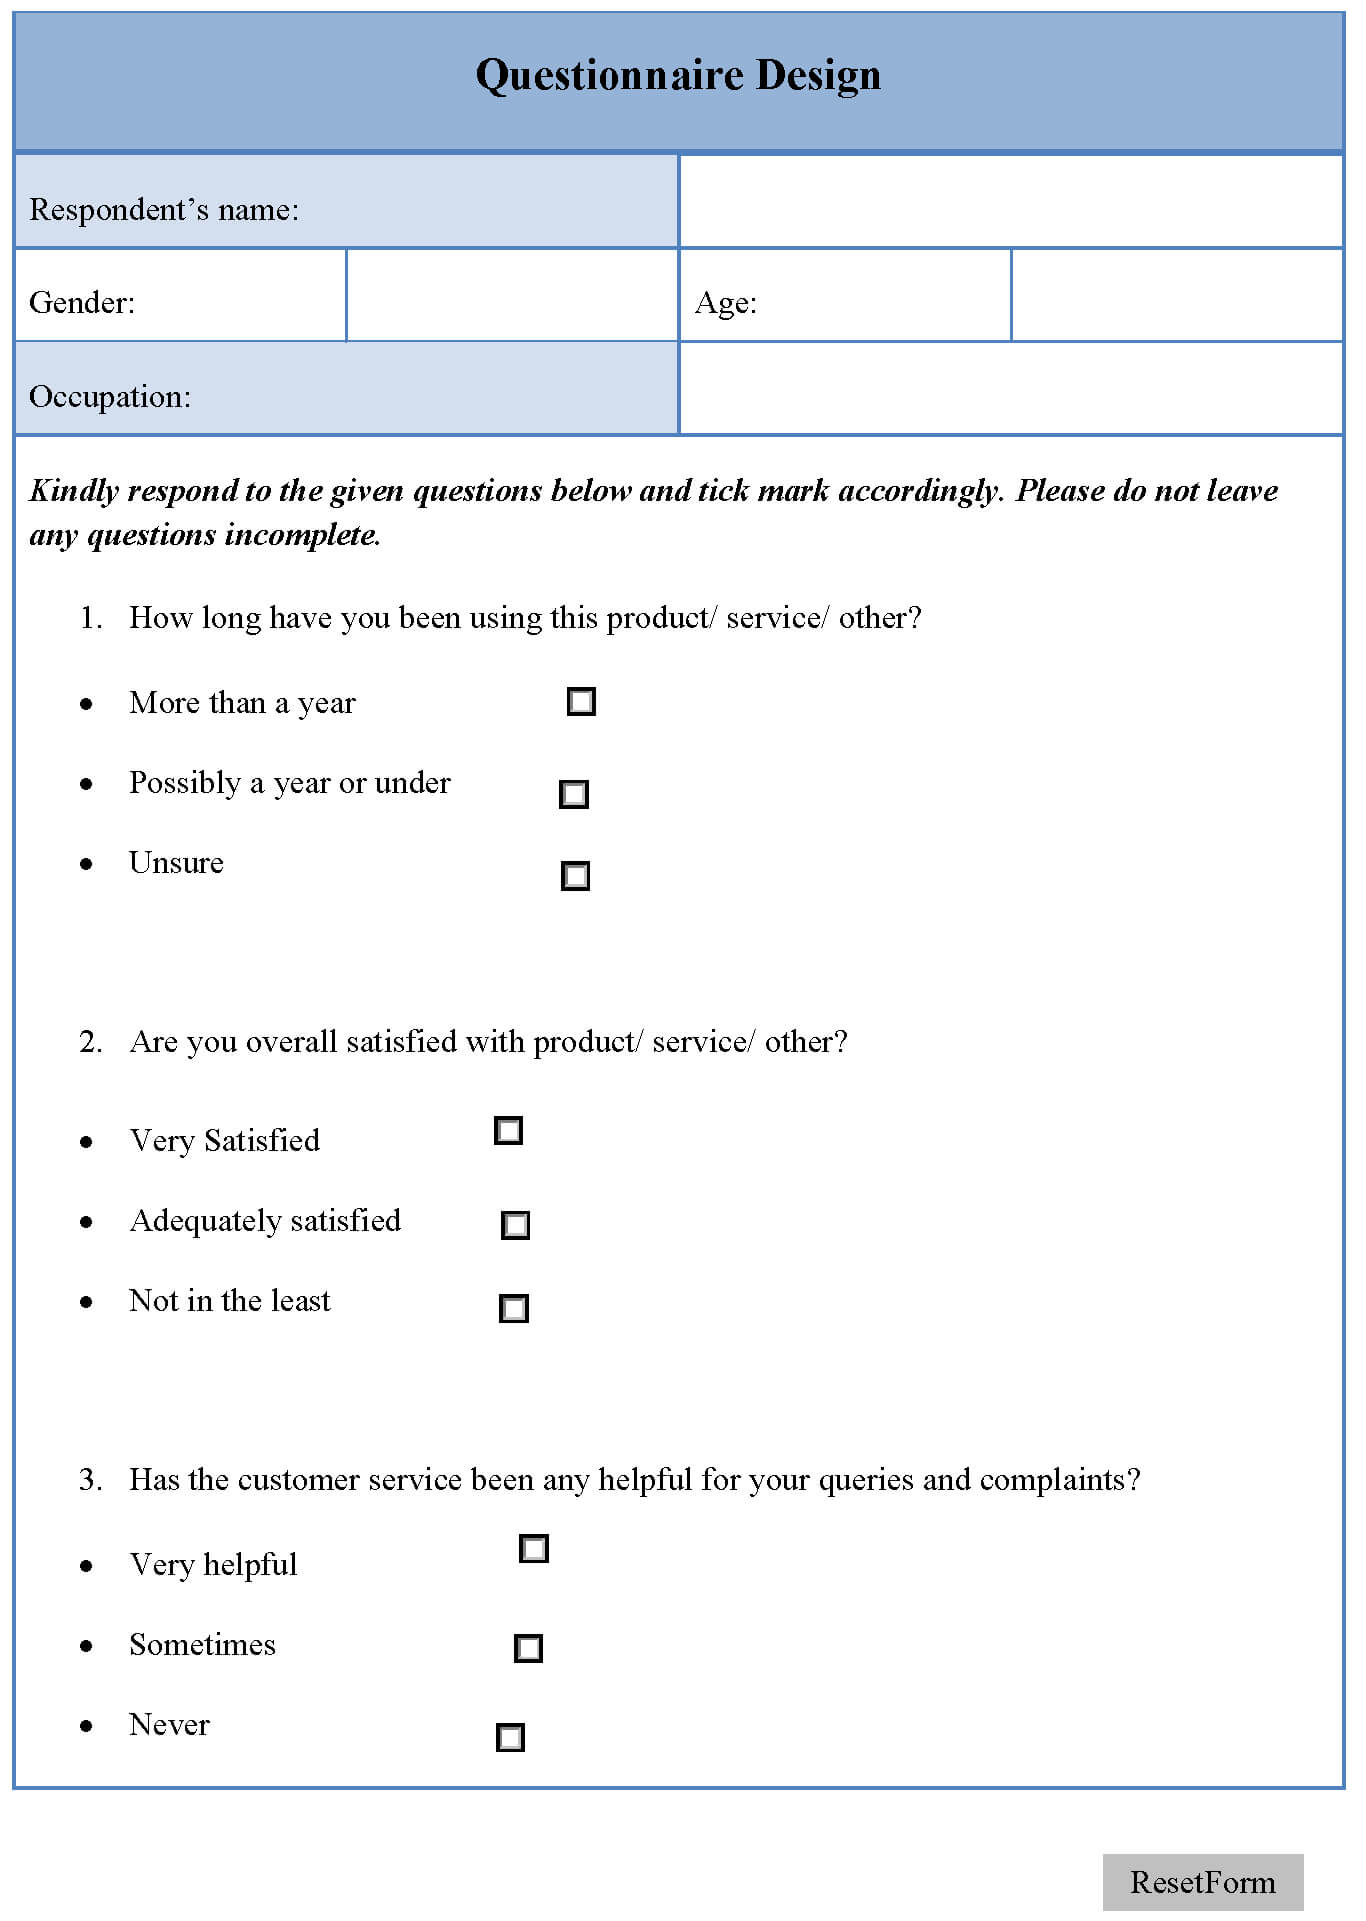 Questionnaire Design Template | Editable Forms pertaining to ...